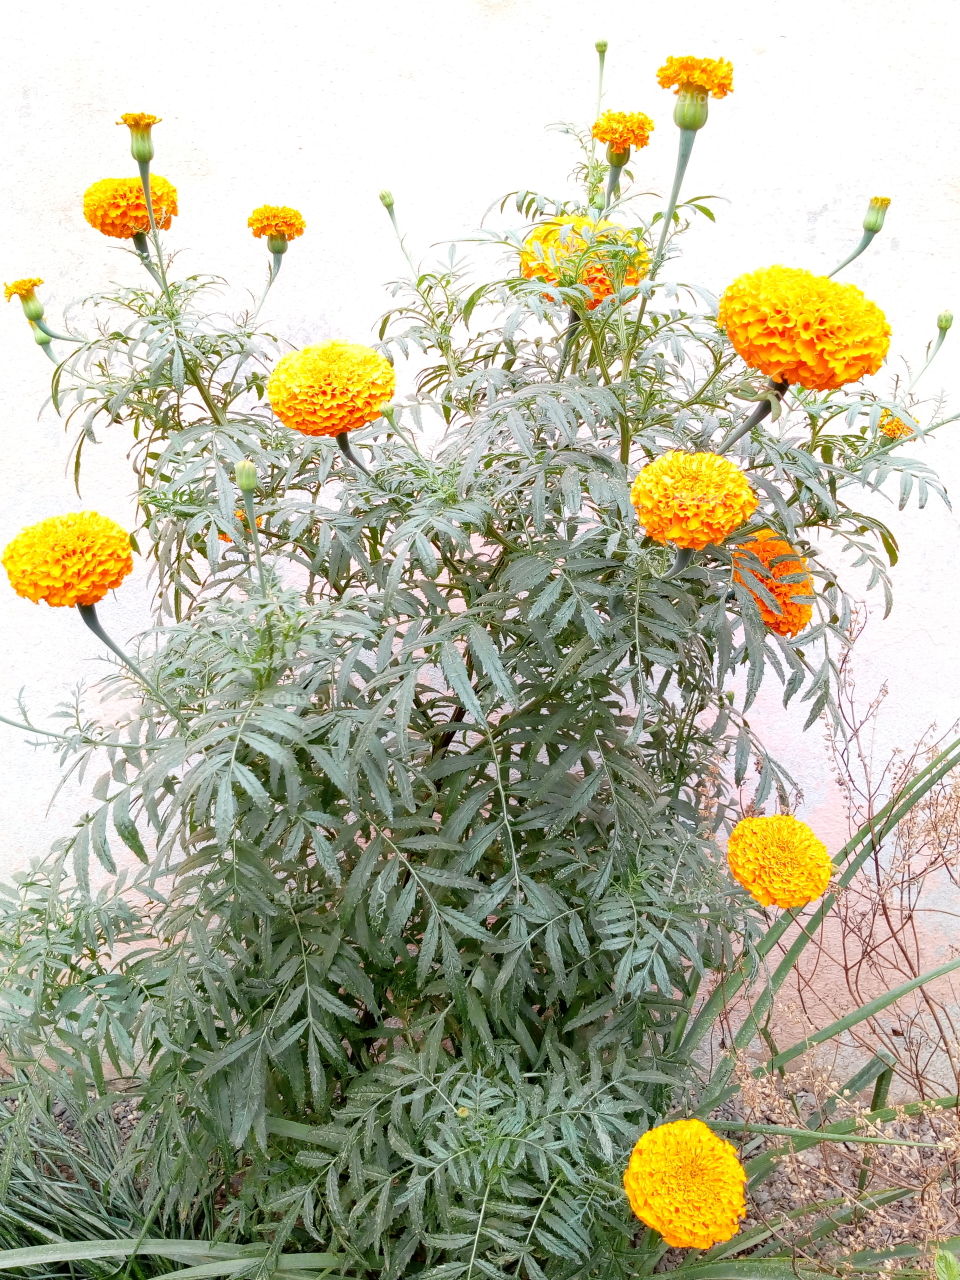 French Marigolds (Tagetes patula) flowering flower.